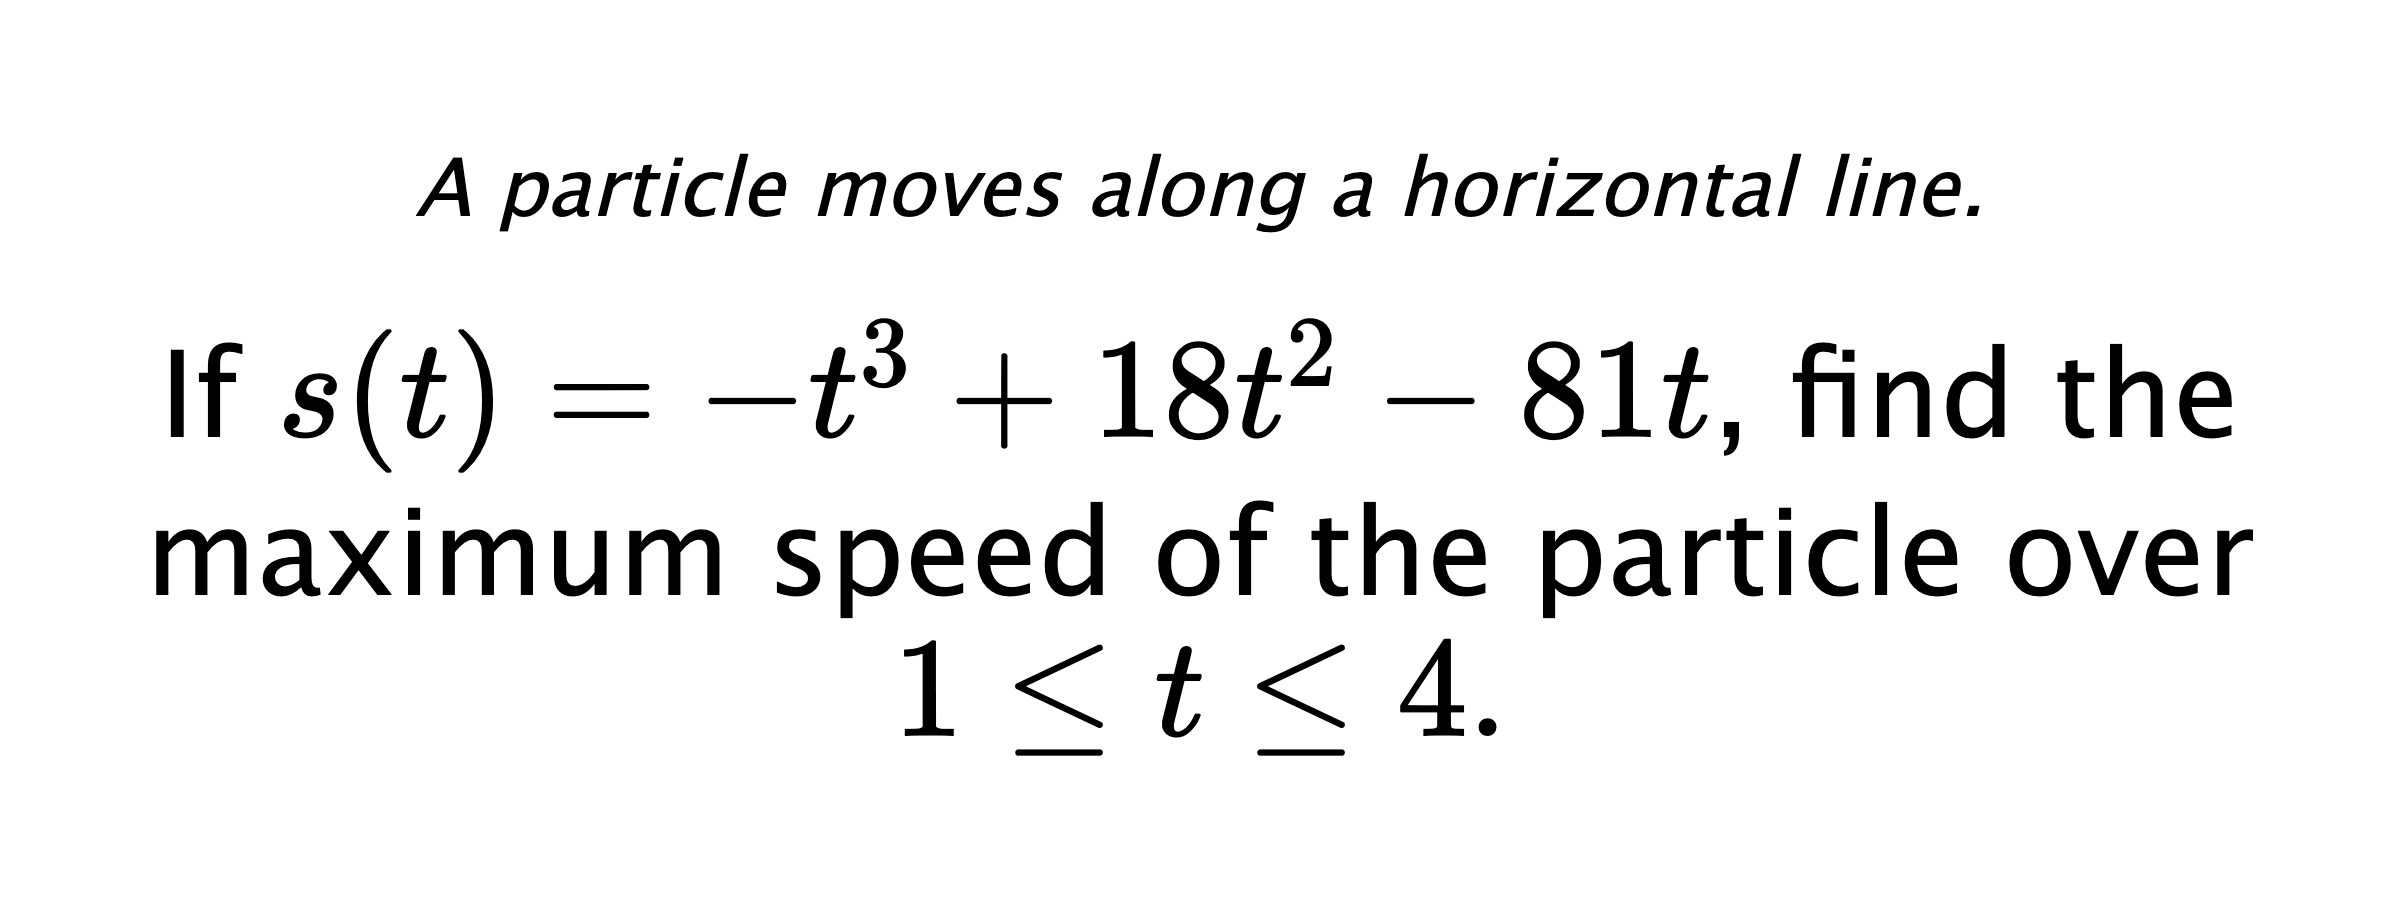 A particle moves along a horizontal line. If $ s(t)=-t^3+18t^2-81t $, find the maximum speed of the particle over $ 1 \leq t \leq 4. $